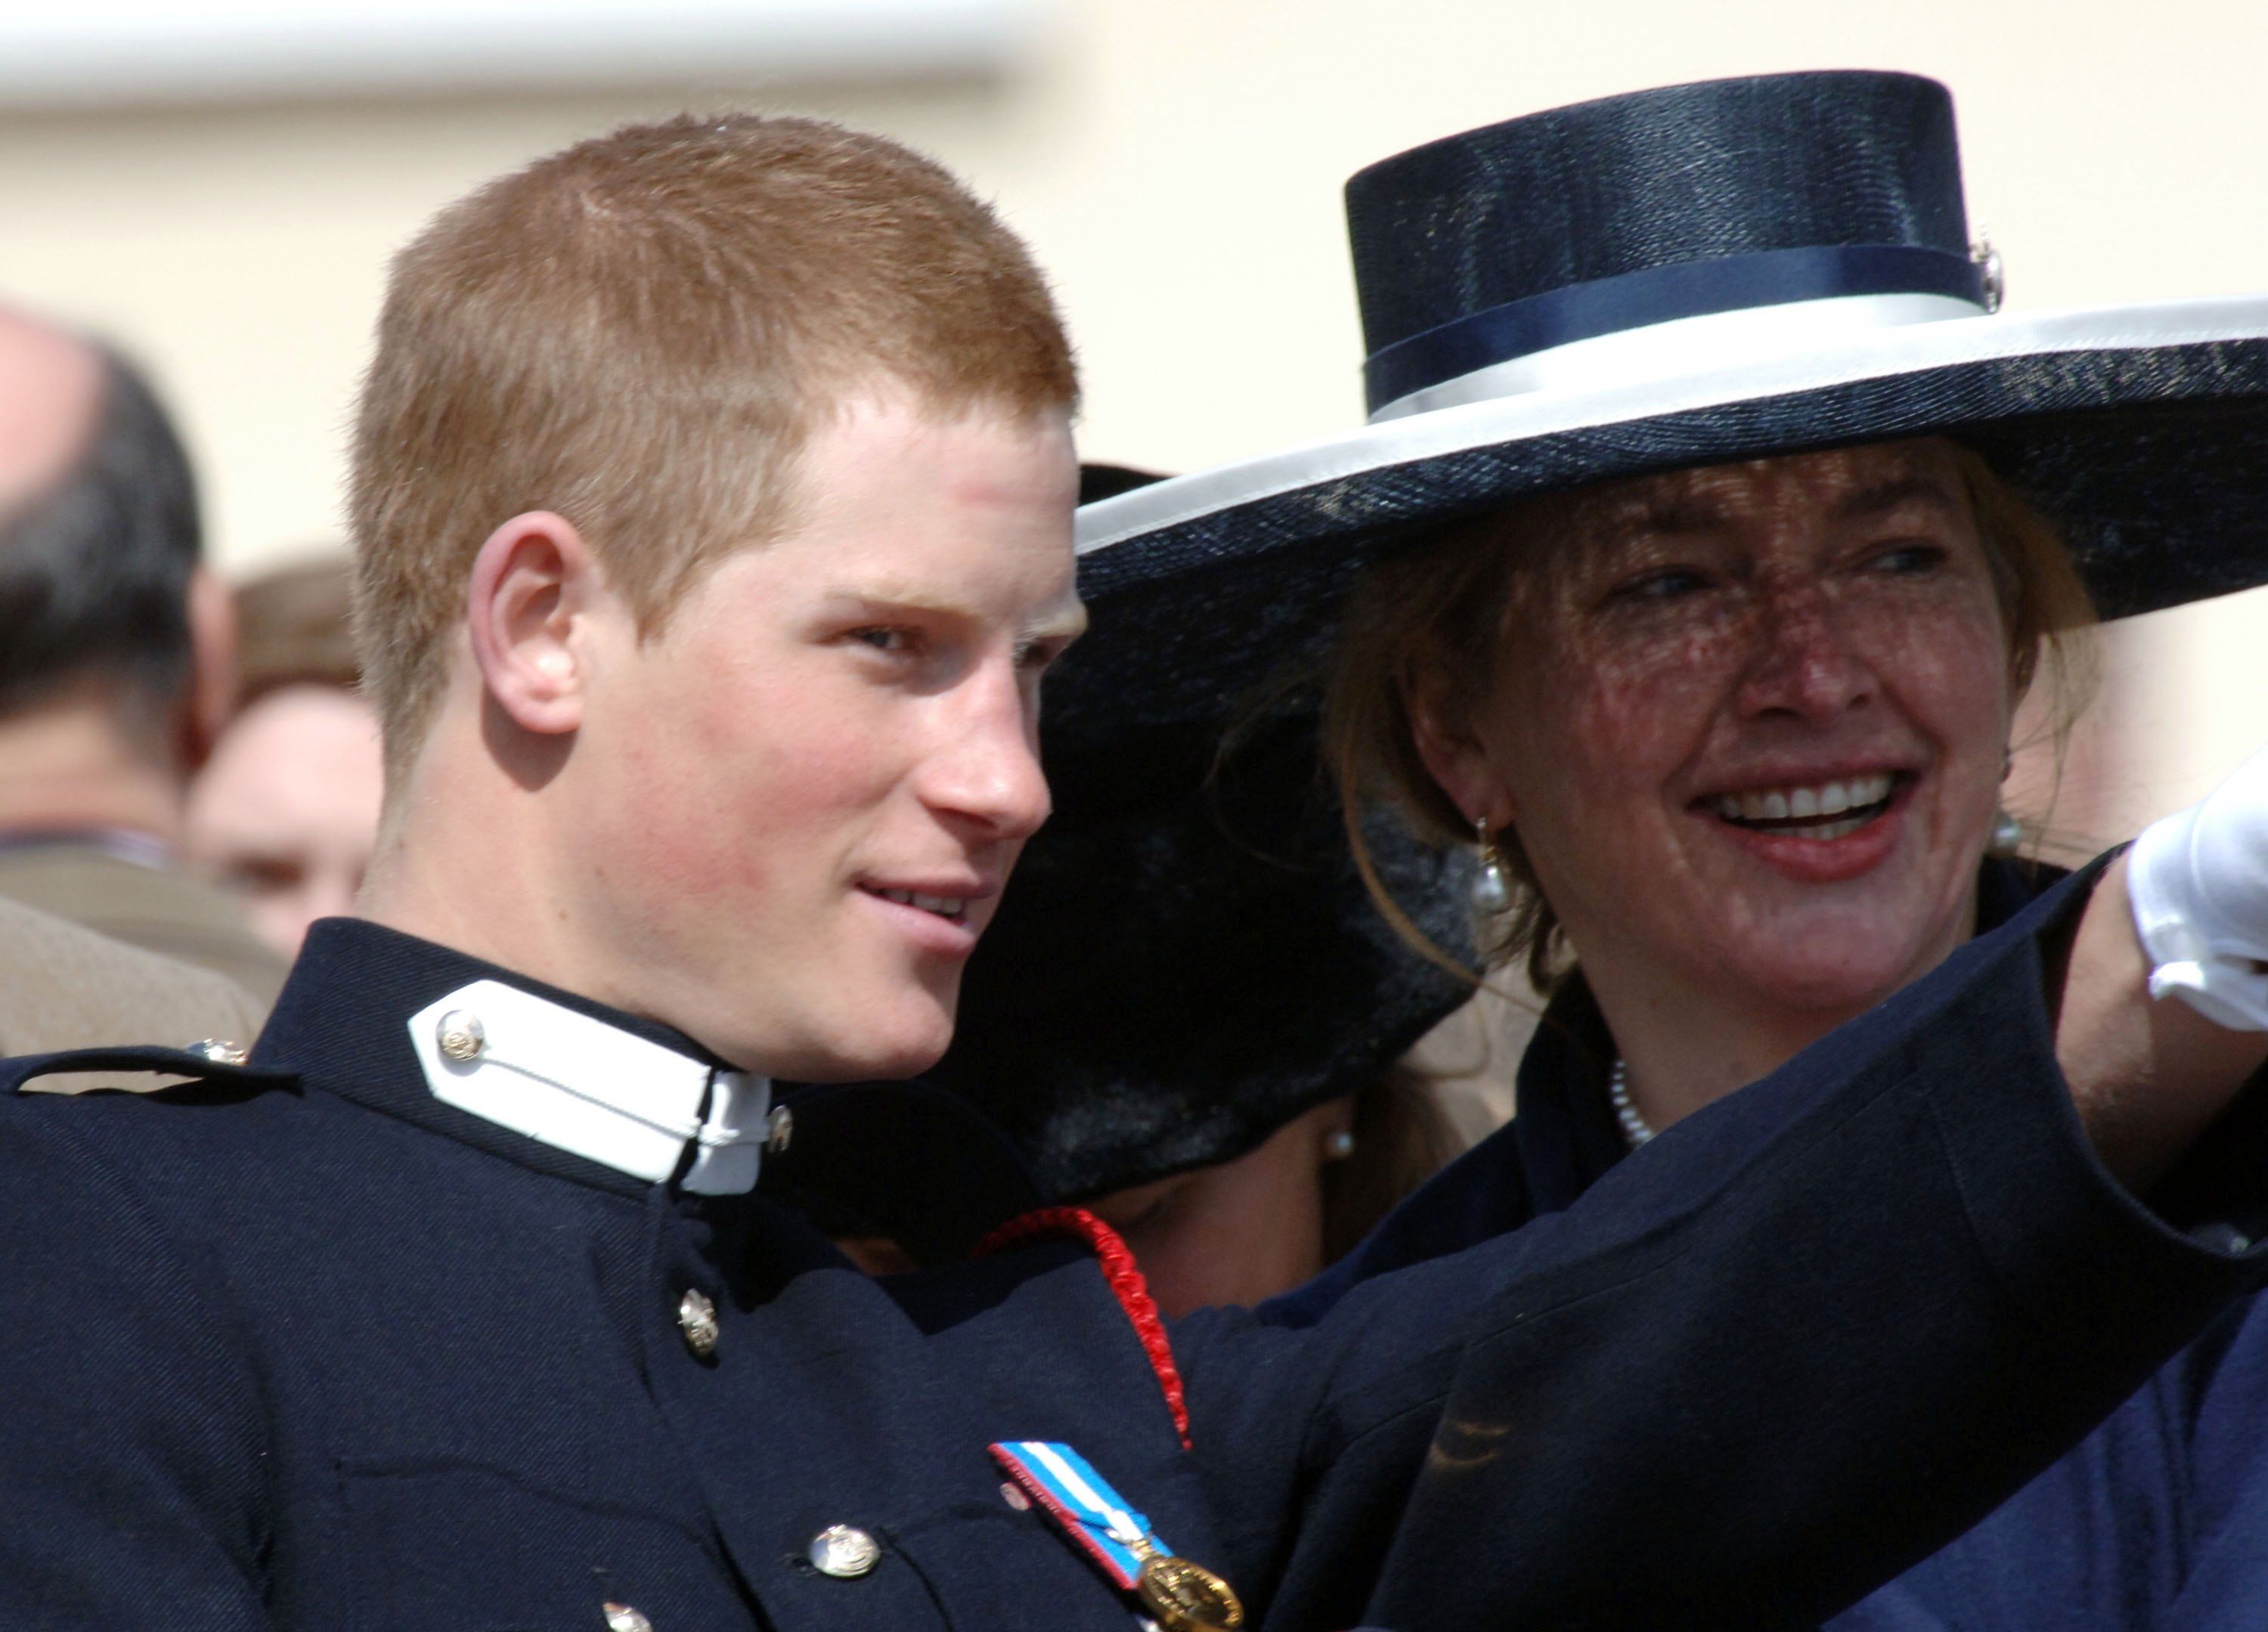 SANDHURST, ENGLAND - APRIL 12: Prince Harry talks to his former nanny Tiggy Legge-Bourke at his passing-out Sovereign's Parade at Sandhurst Military Academy on April 12, 2006 in Sandhurst, England. | Foto von: Anwar Hussein/Getty Images